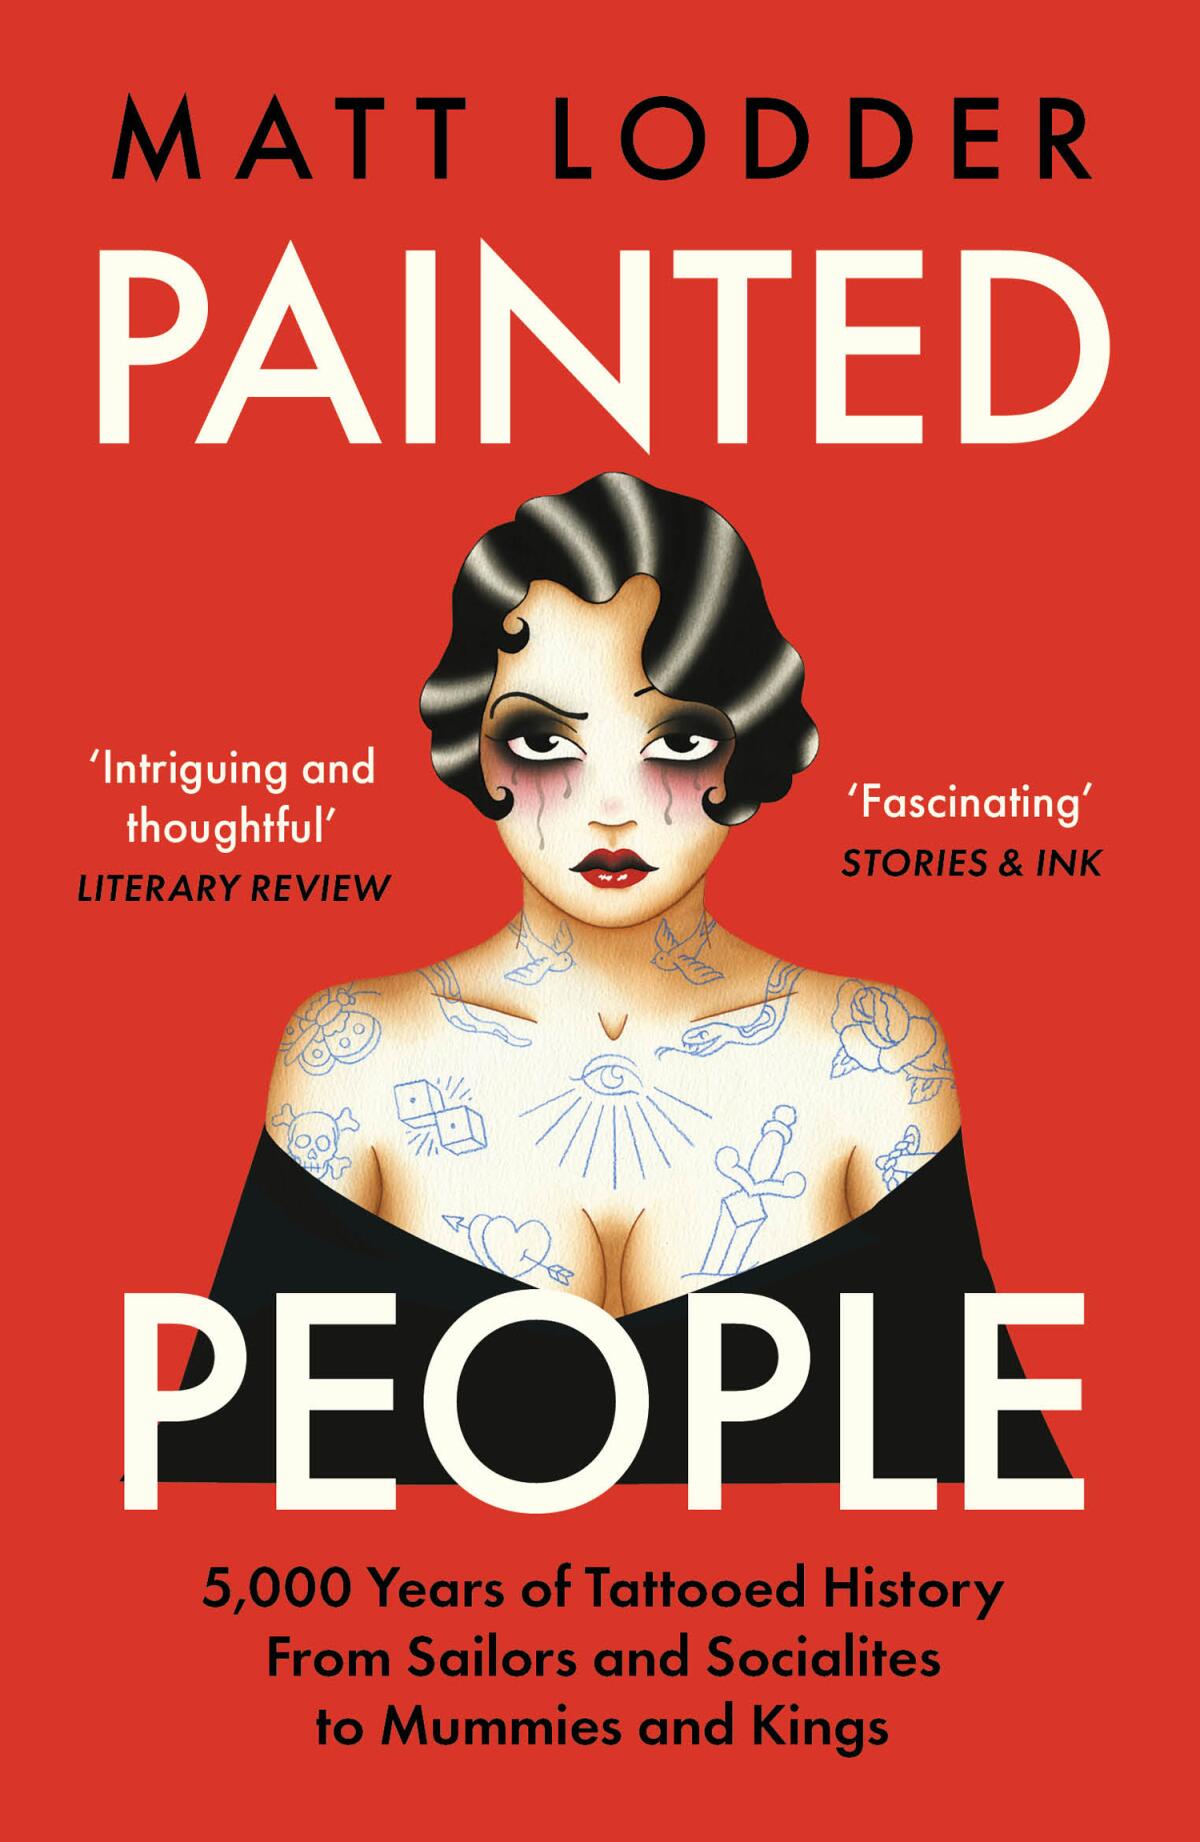 Cover of "Painted People: 5,000 Years of Tattooed History 